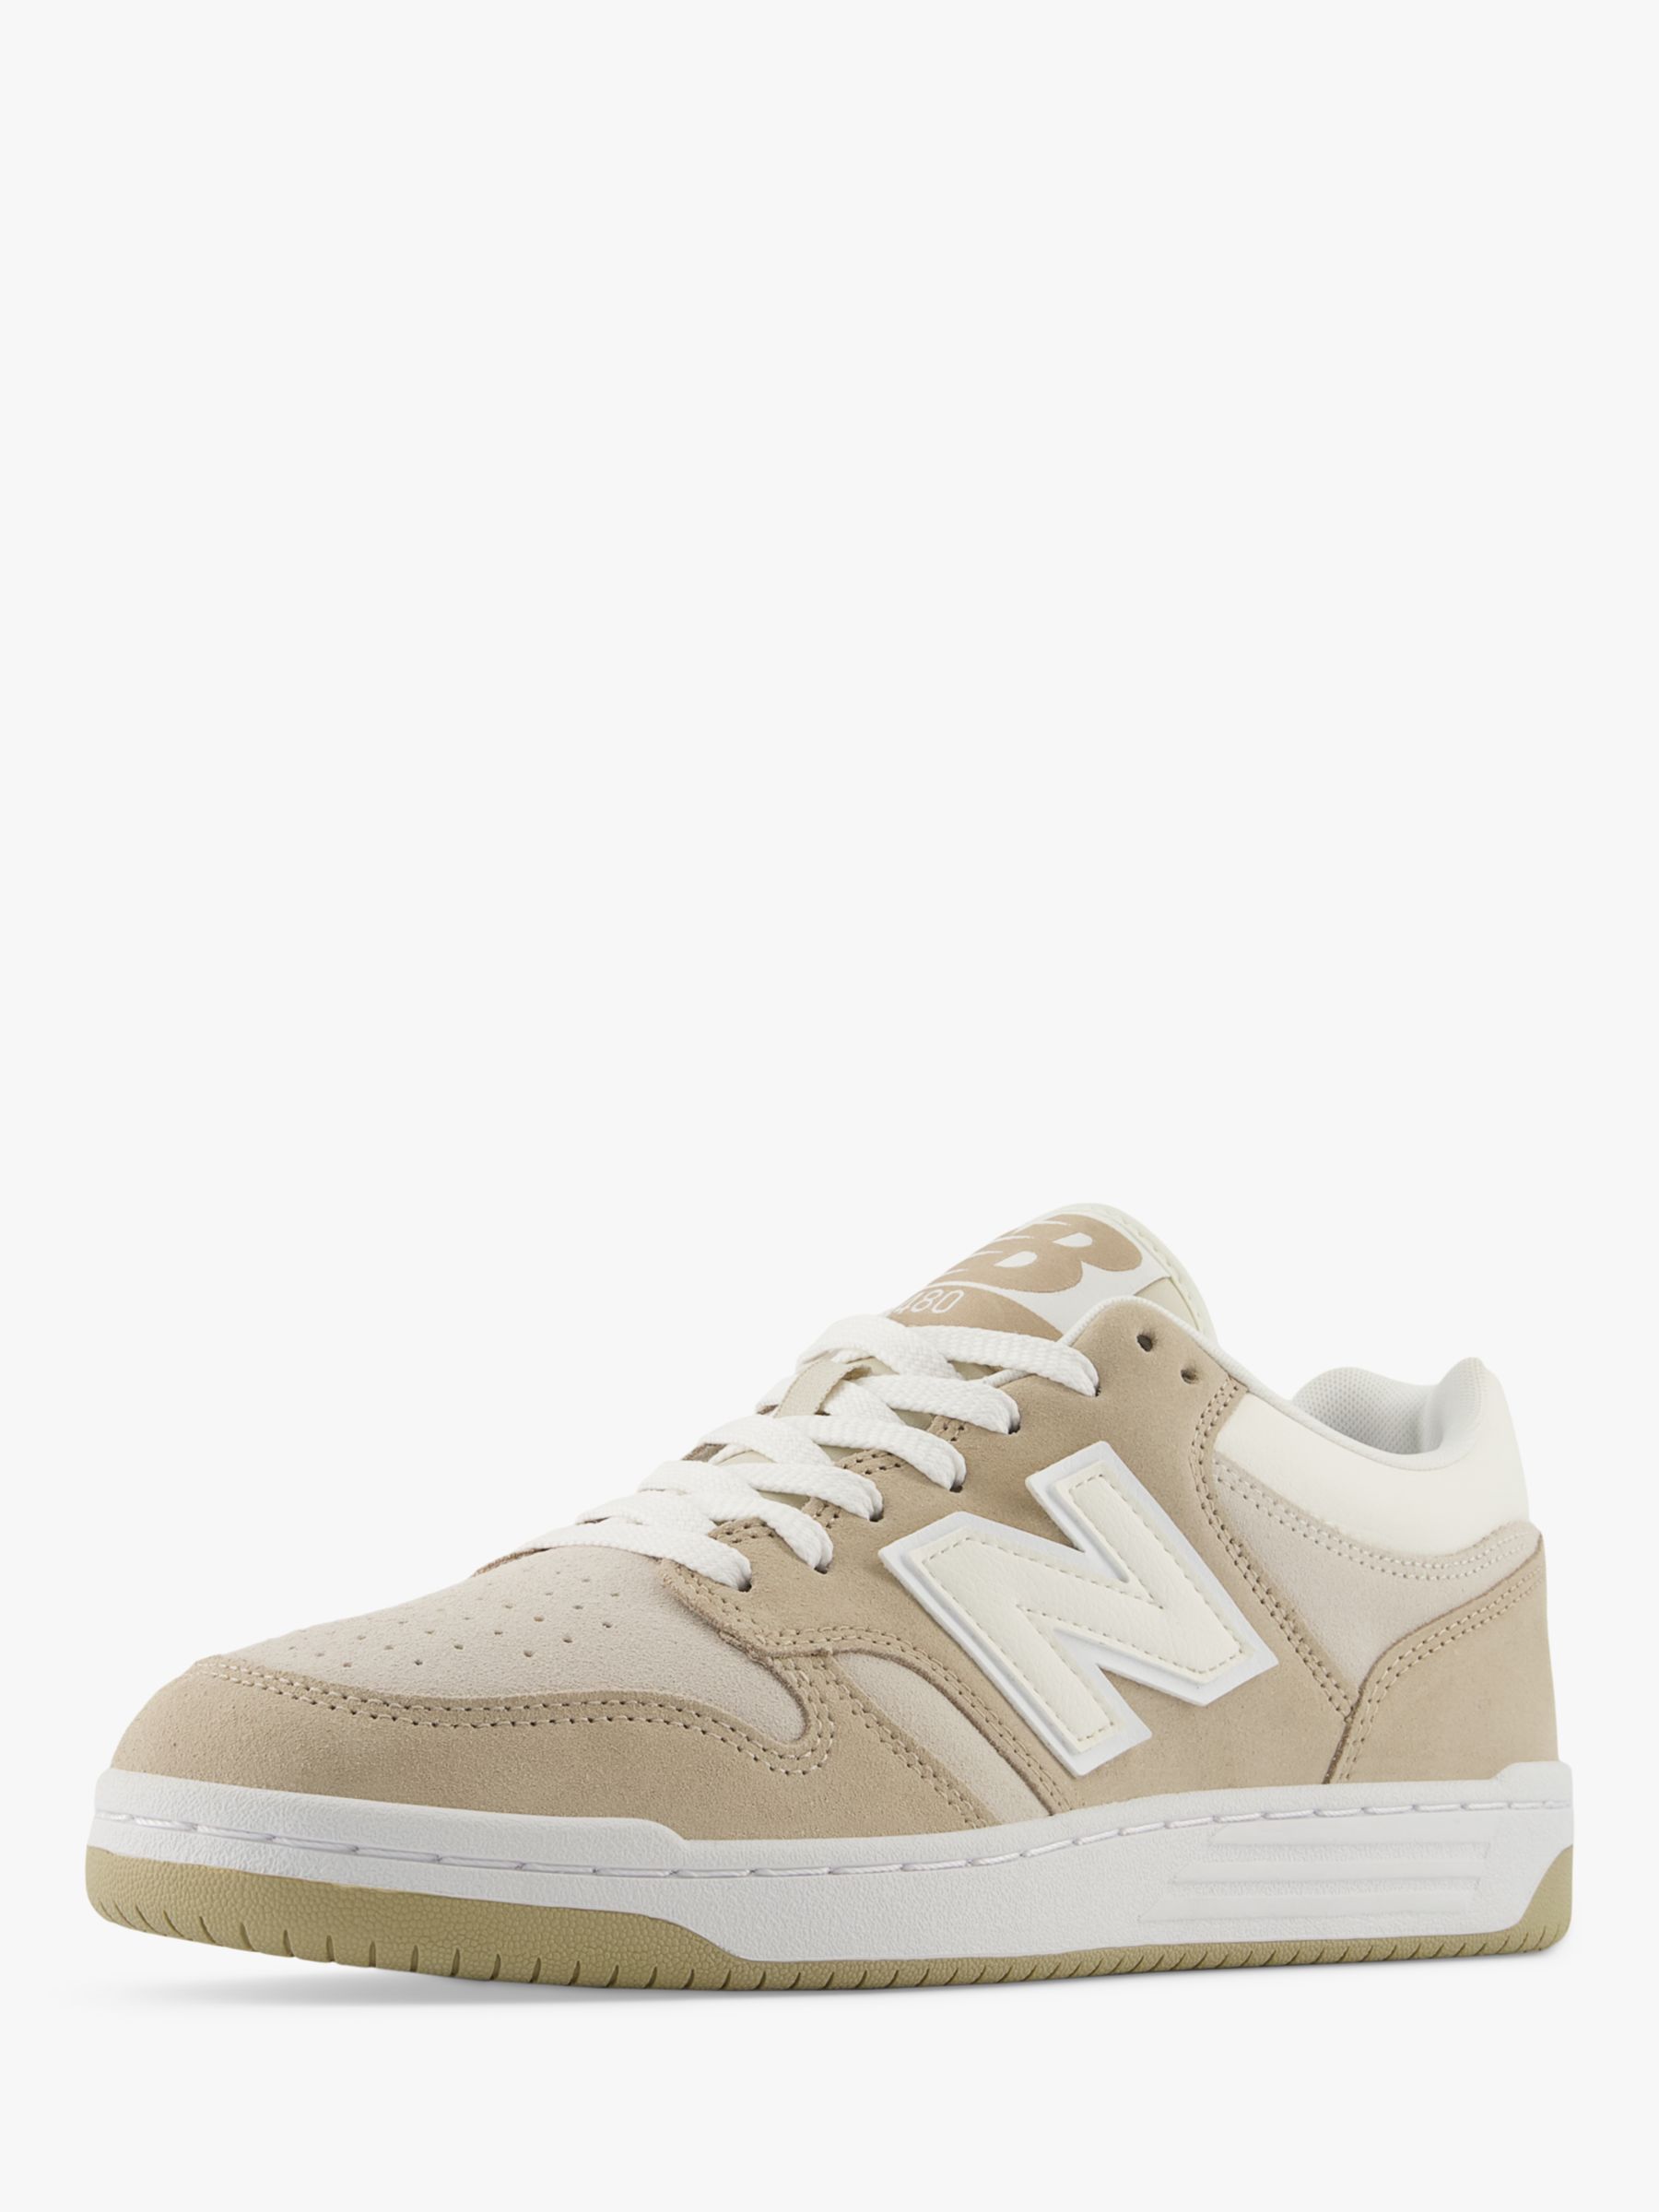 New Balance 480 Lace Up Trainers, Beige/White, 7